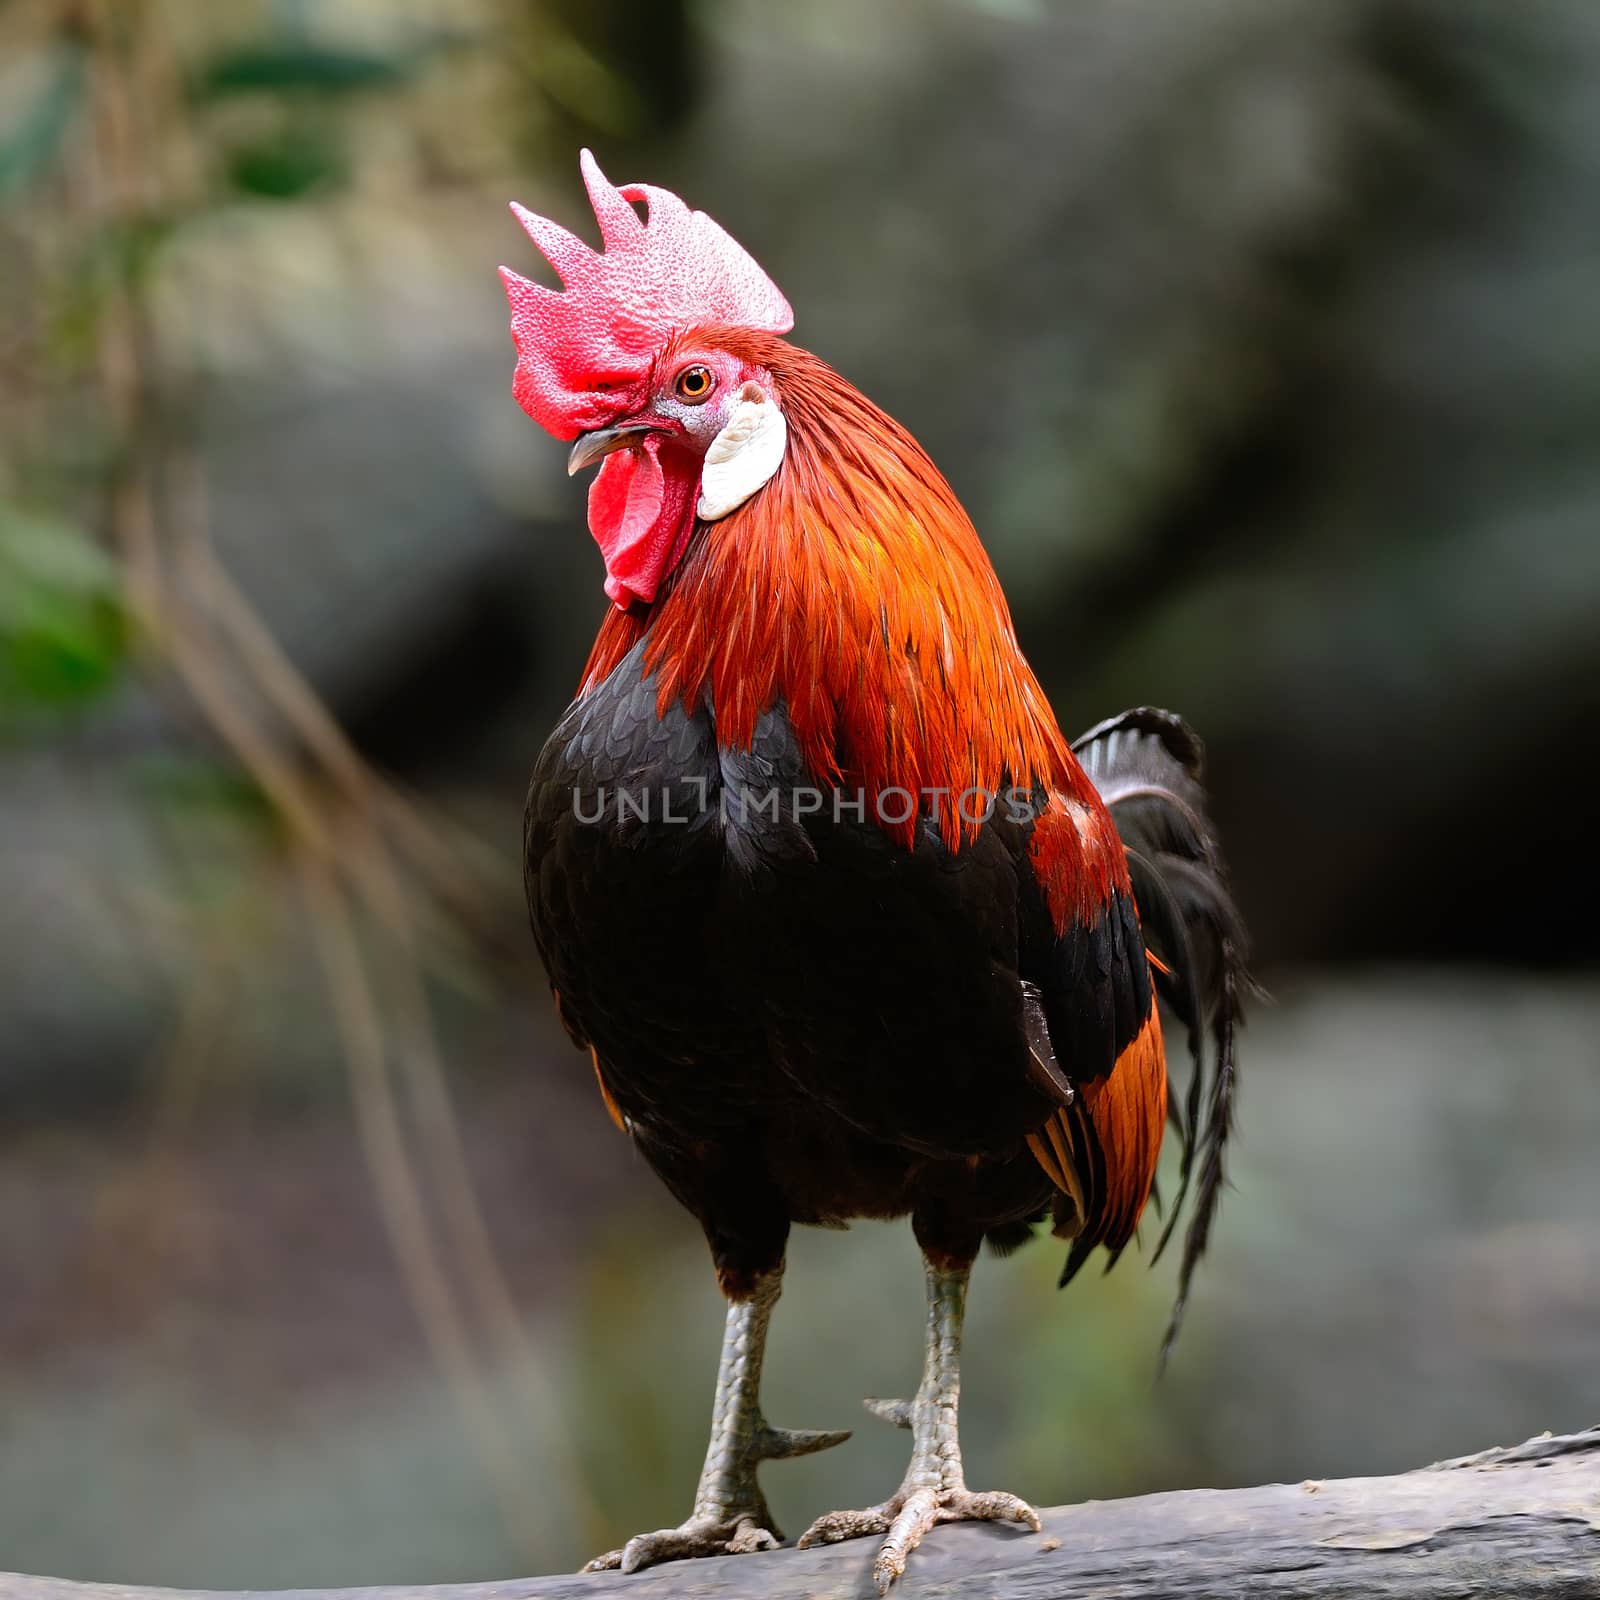 Oudstanding male Red Junglefowl (Gallus gallus), standing on the log